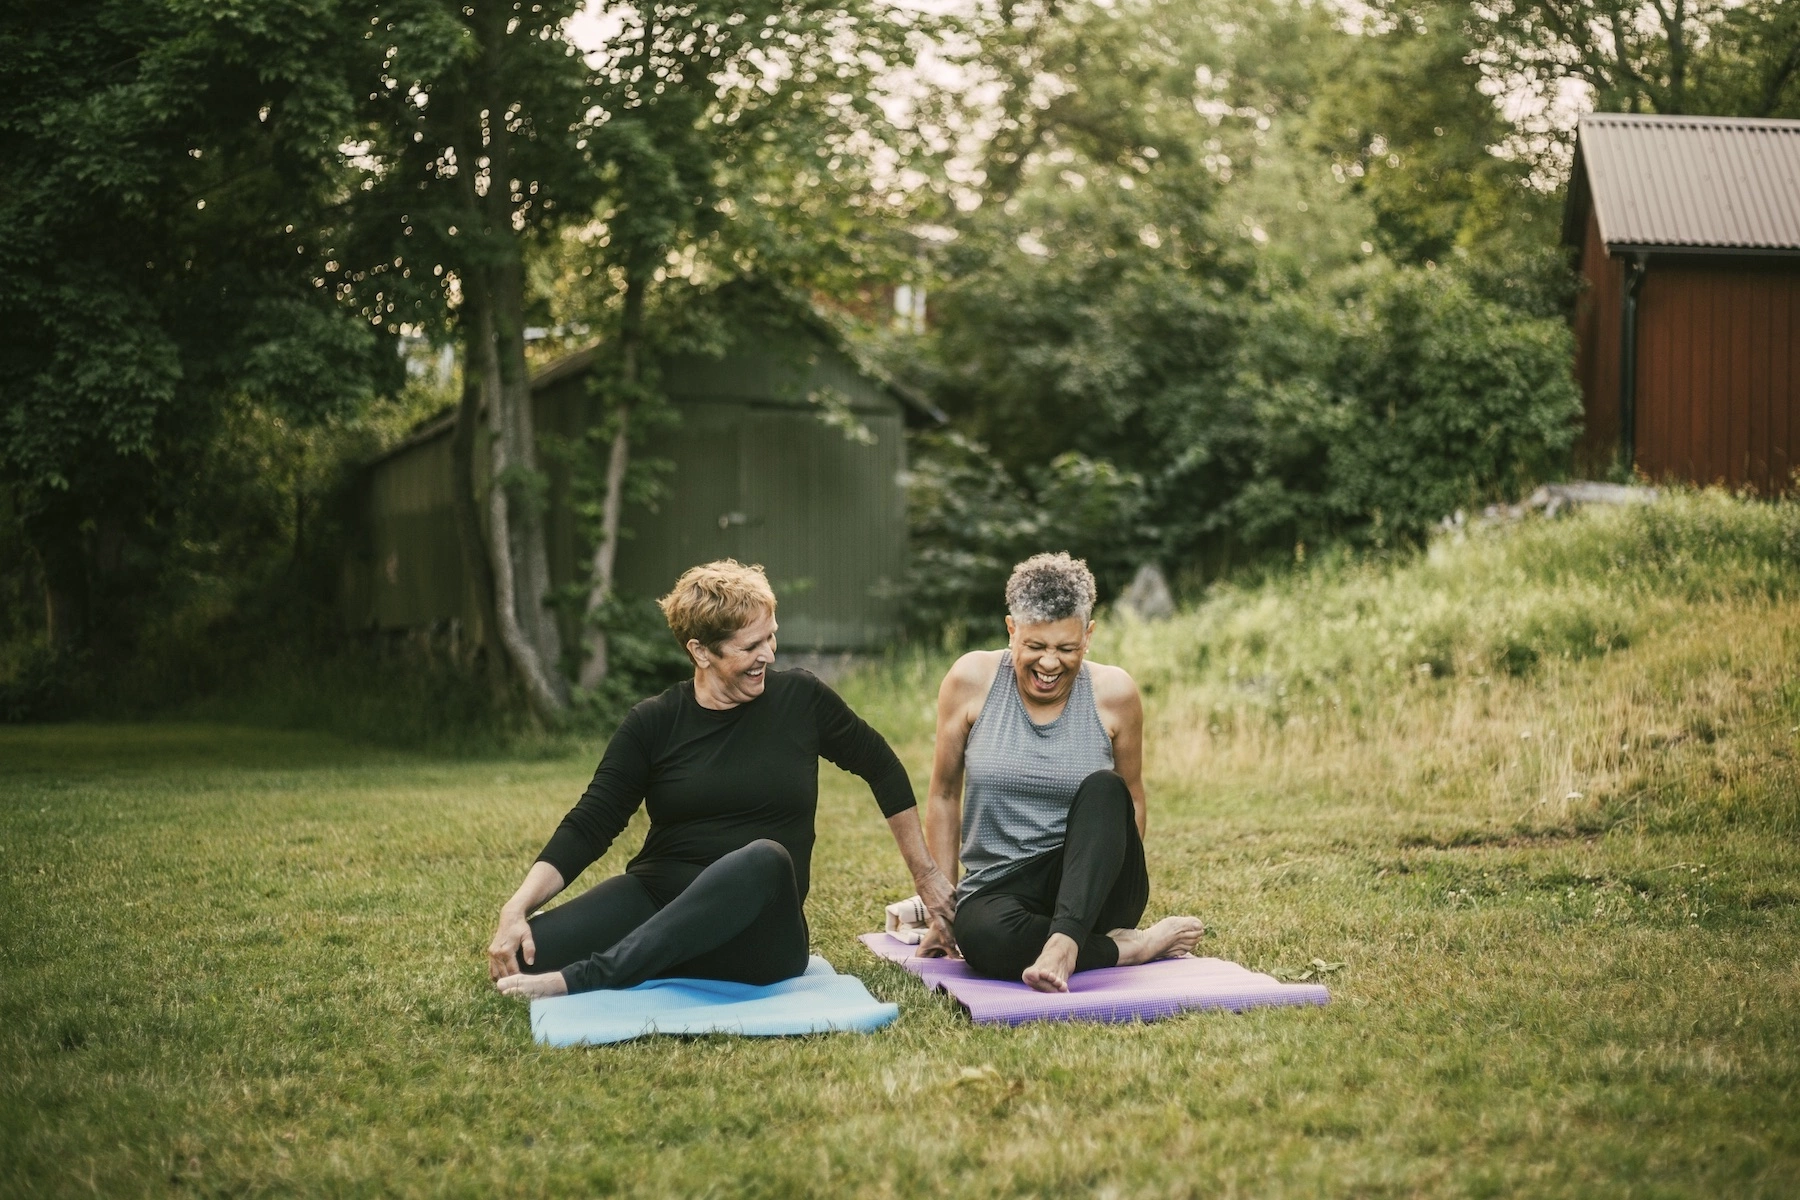 Two older women sit on yoga mats in the grass in the backyard, they are laughing and holding hands